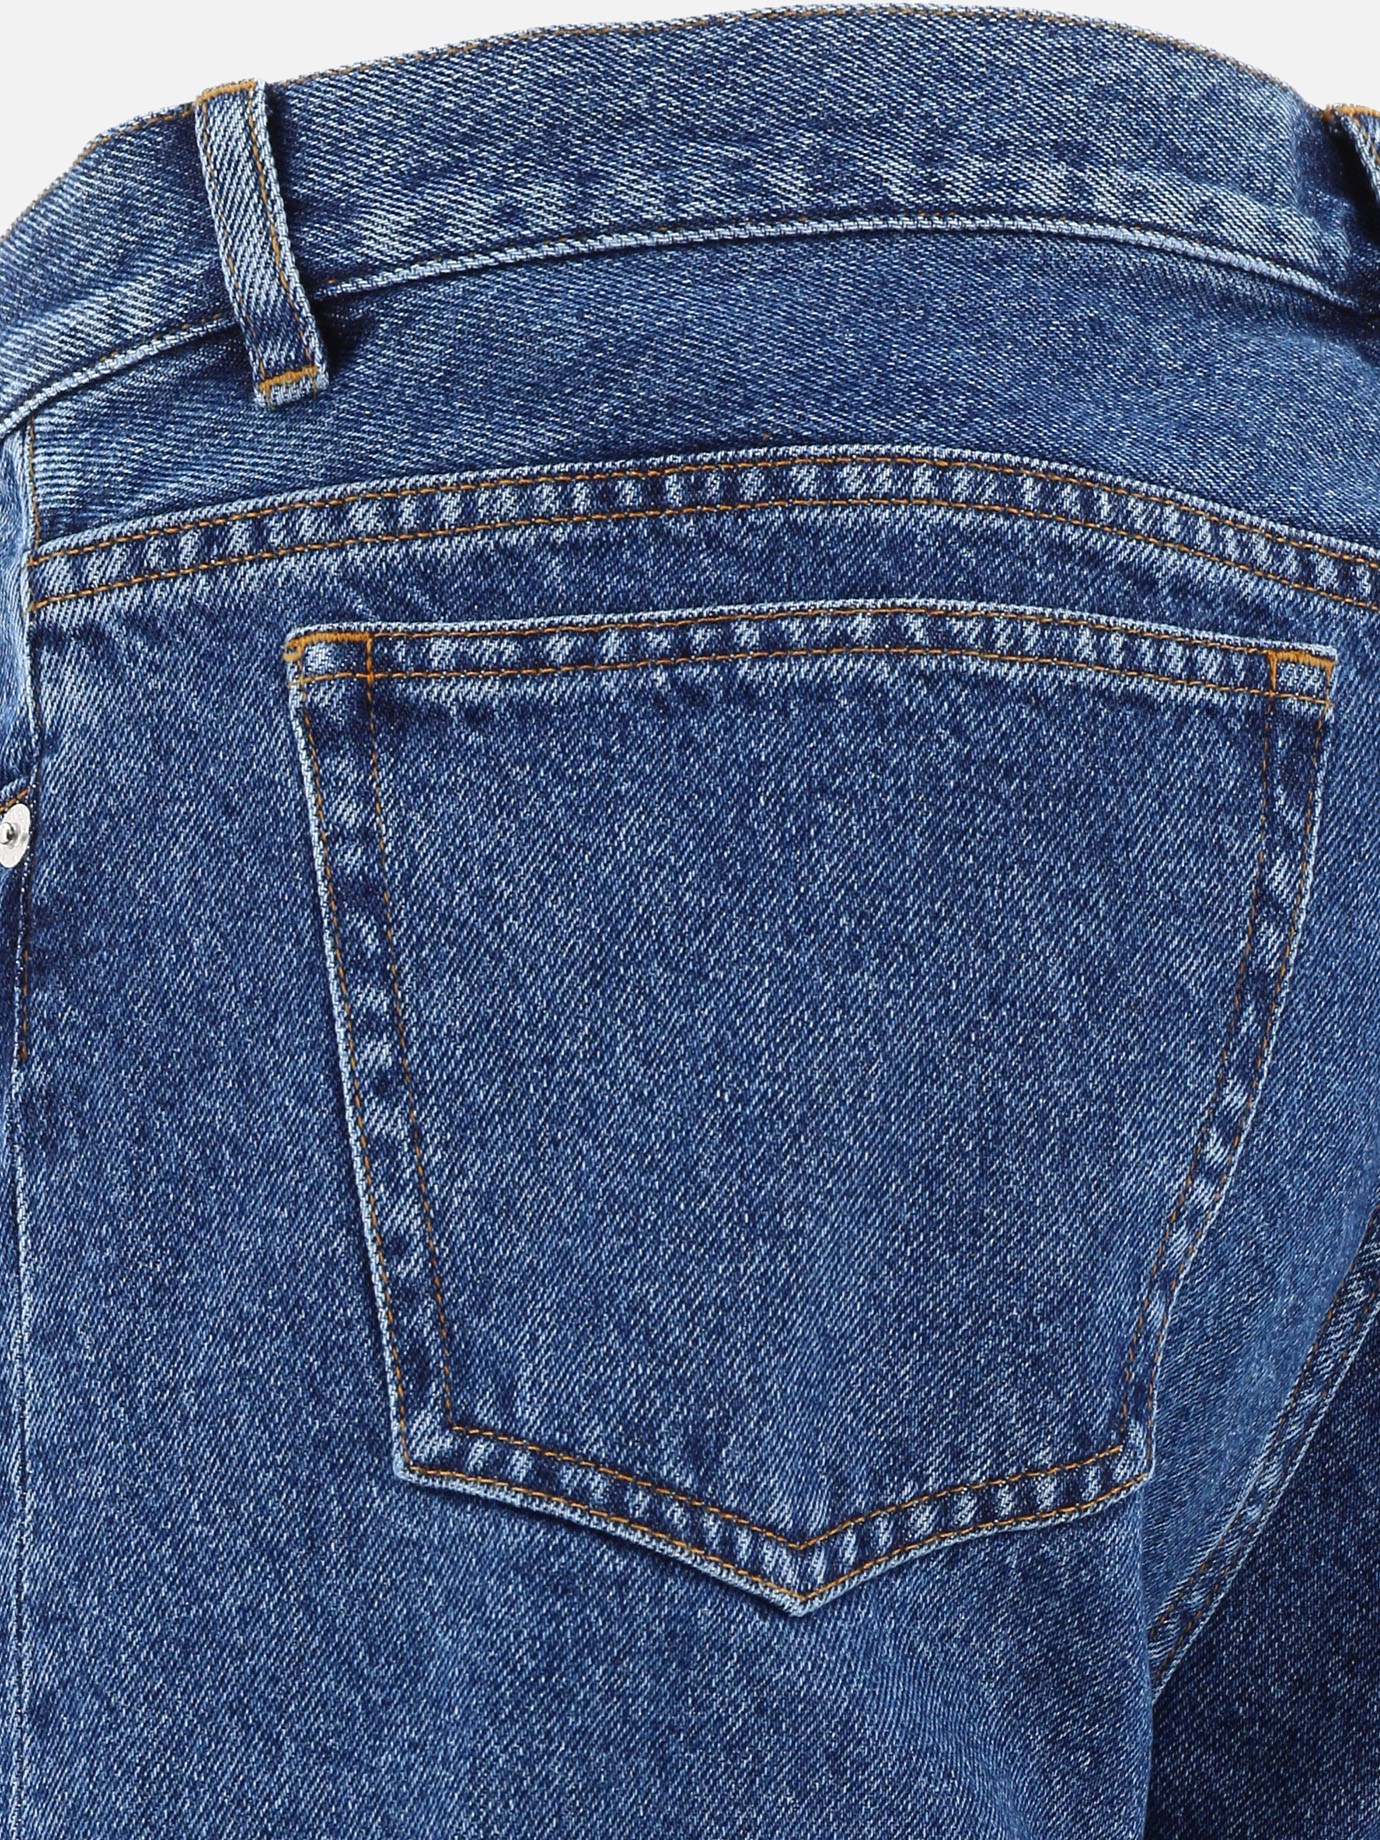  New Standard  jeans by A.P.C.